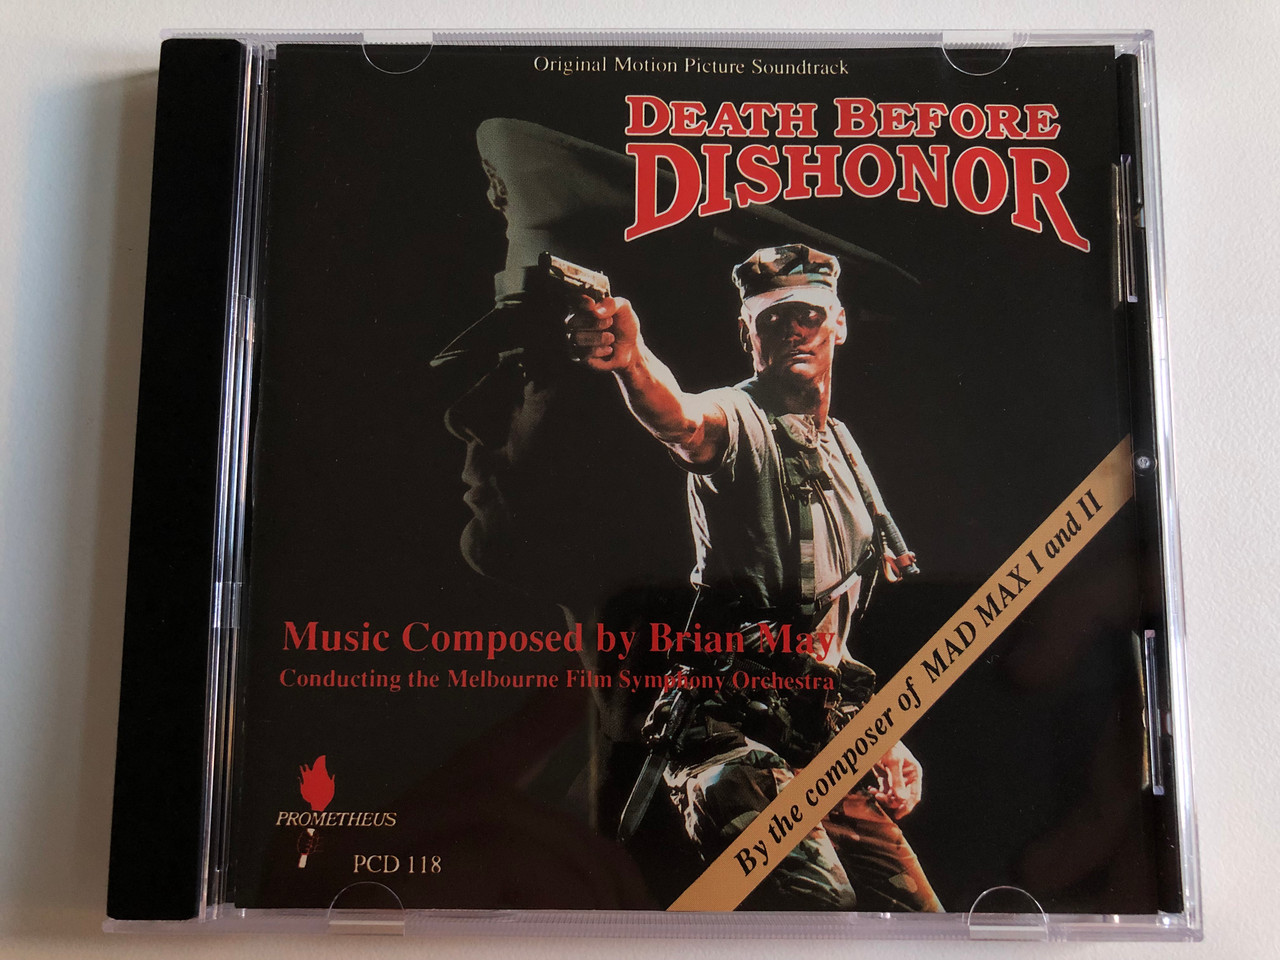 https://cdn10.bigcommerce.com/s-62bdpkt7pb/products/0/images/197497/Death_Before_Dishonor_Original_Motion_Picture_Soundtrack_-_Music_Composed_by_Brian_May_Conducting_the_Melbouurne_Film_Symphony_Orchestra_By_The_composer_of_Mad_Max_I_and_II_Prometheus_Re_1__73819.1635496826.1280.1280.JPG?c=2&_gl=1*7yssgo*_ga*MjA2NTIxMjE2MC4xNTkwNTEyNTMy*_ga_WS2VZYPC6G*MTYzNTQ5NjQyMS4xNDYuMS4xNjM1NDk2NDUwLjMx